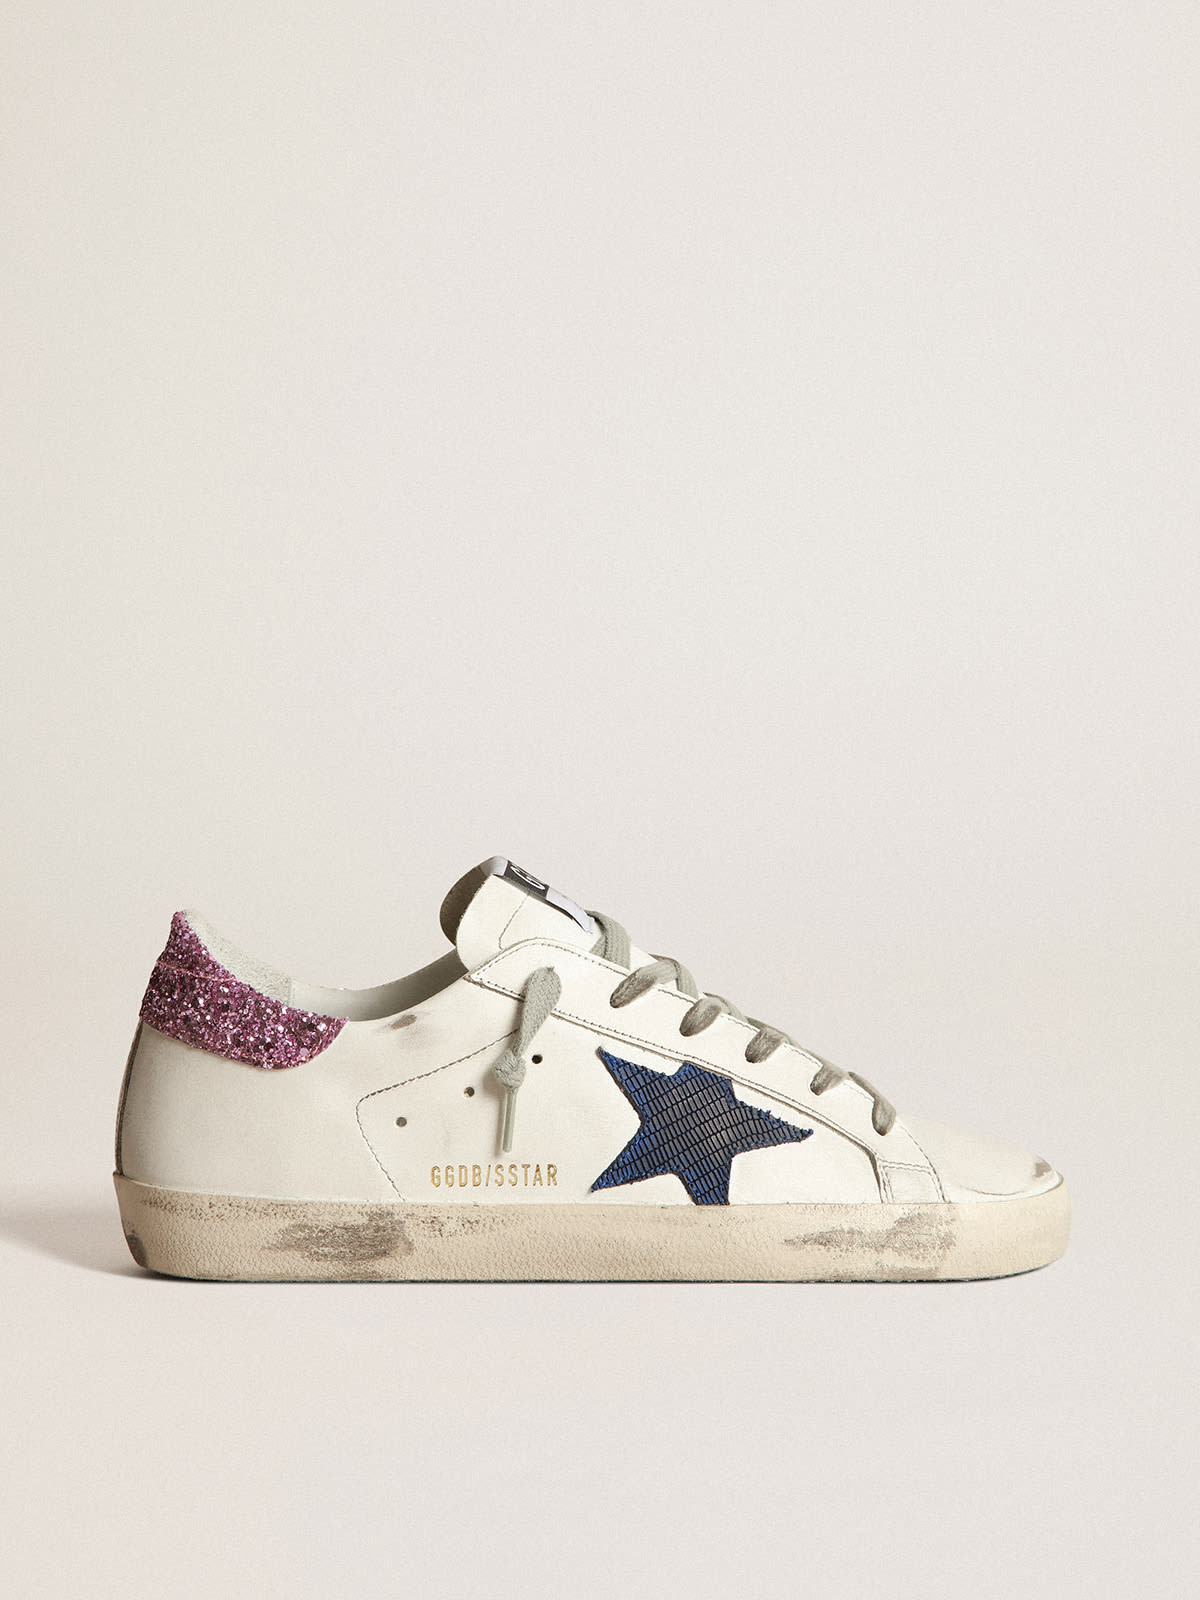 Golden Goose - White Super-Star sneakers with blue star and glittery heel tab in 